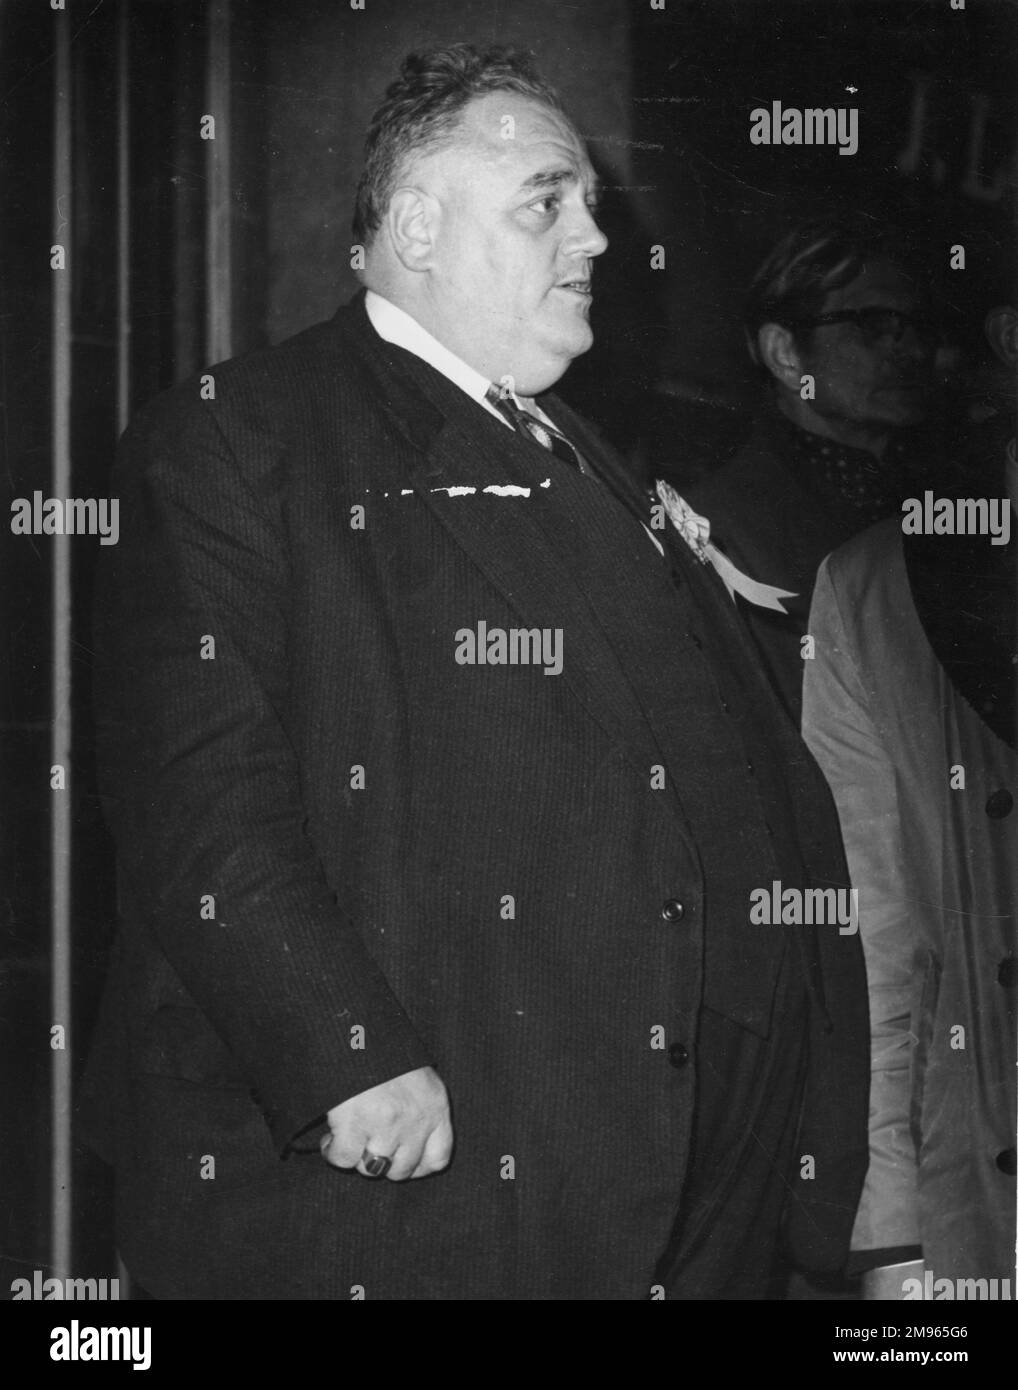 Sir Cyril Smith (1928 - 2010), British Liberal Party politician, MP for Rochdale, Lancashire from 1972 until he retired in 1992. Stock Photo